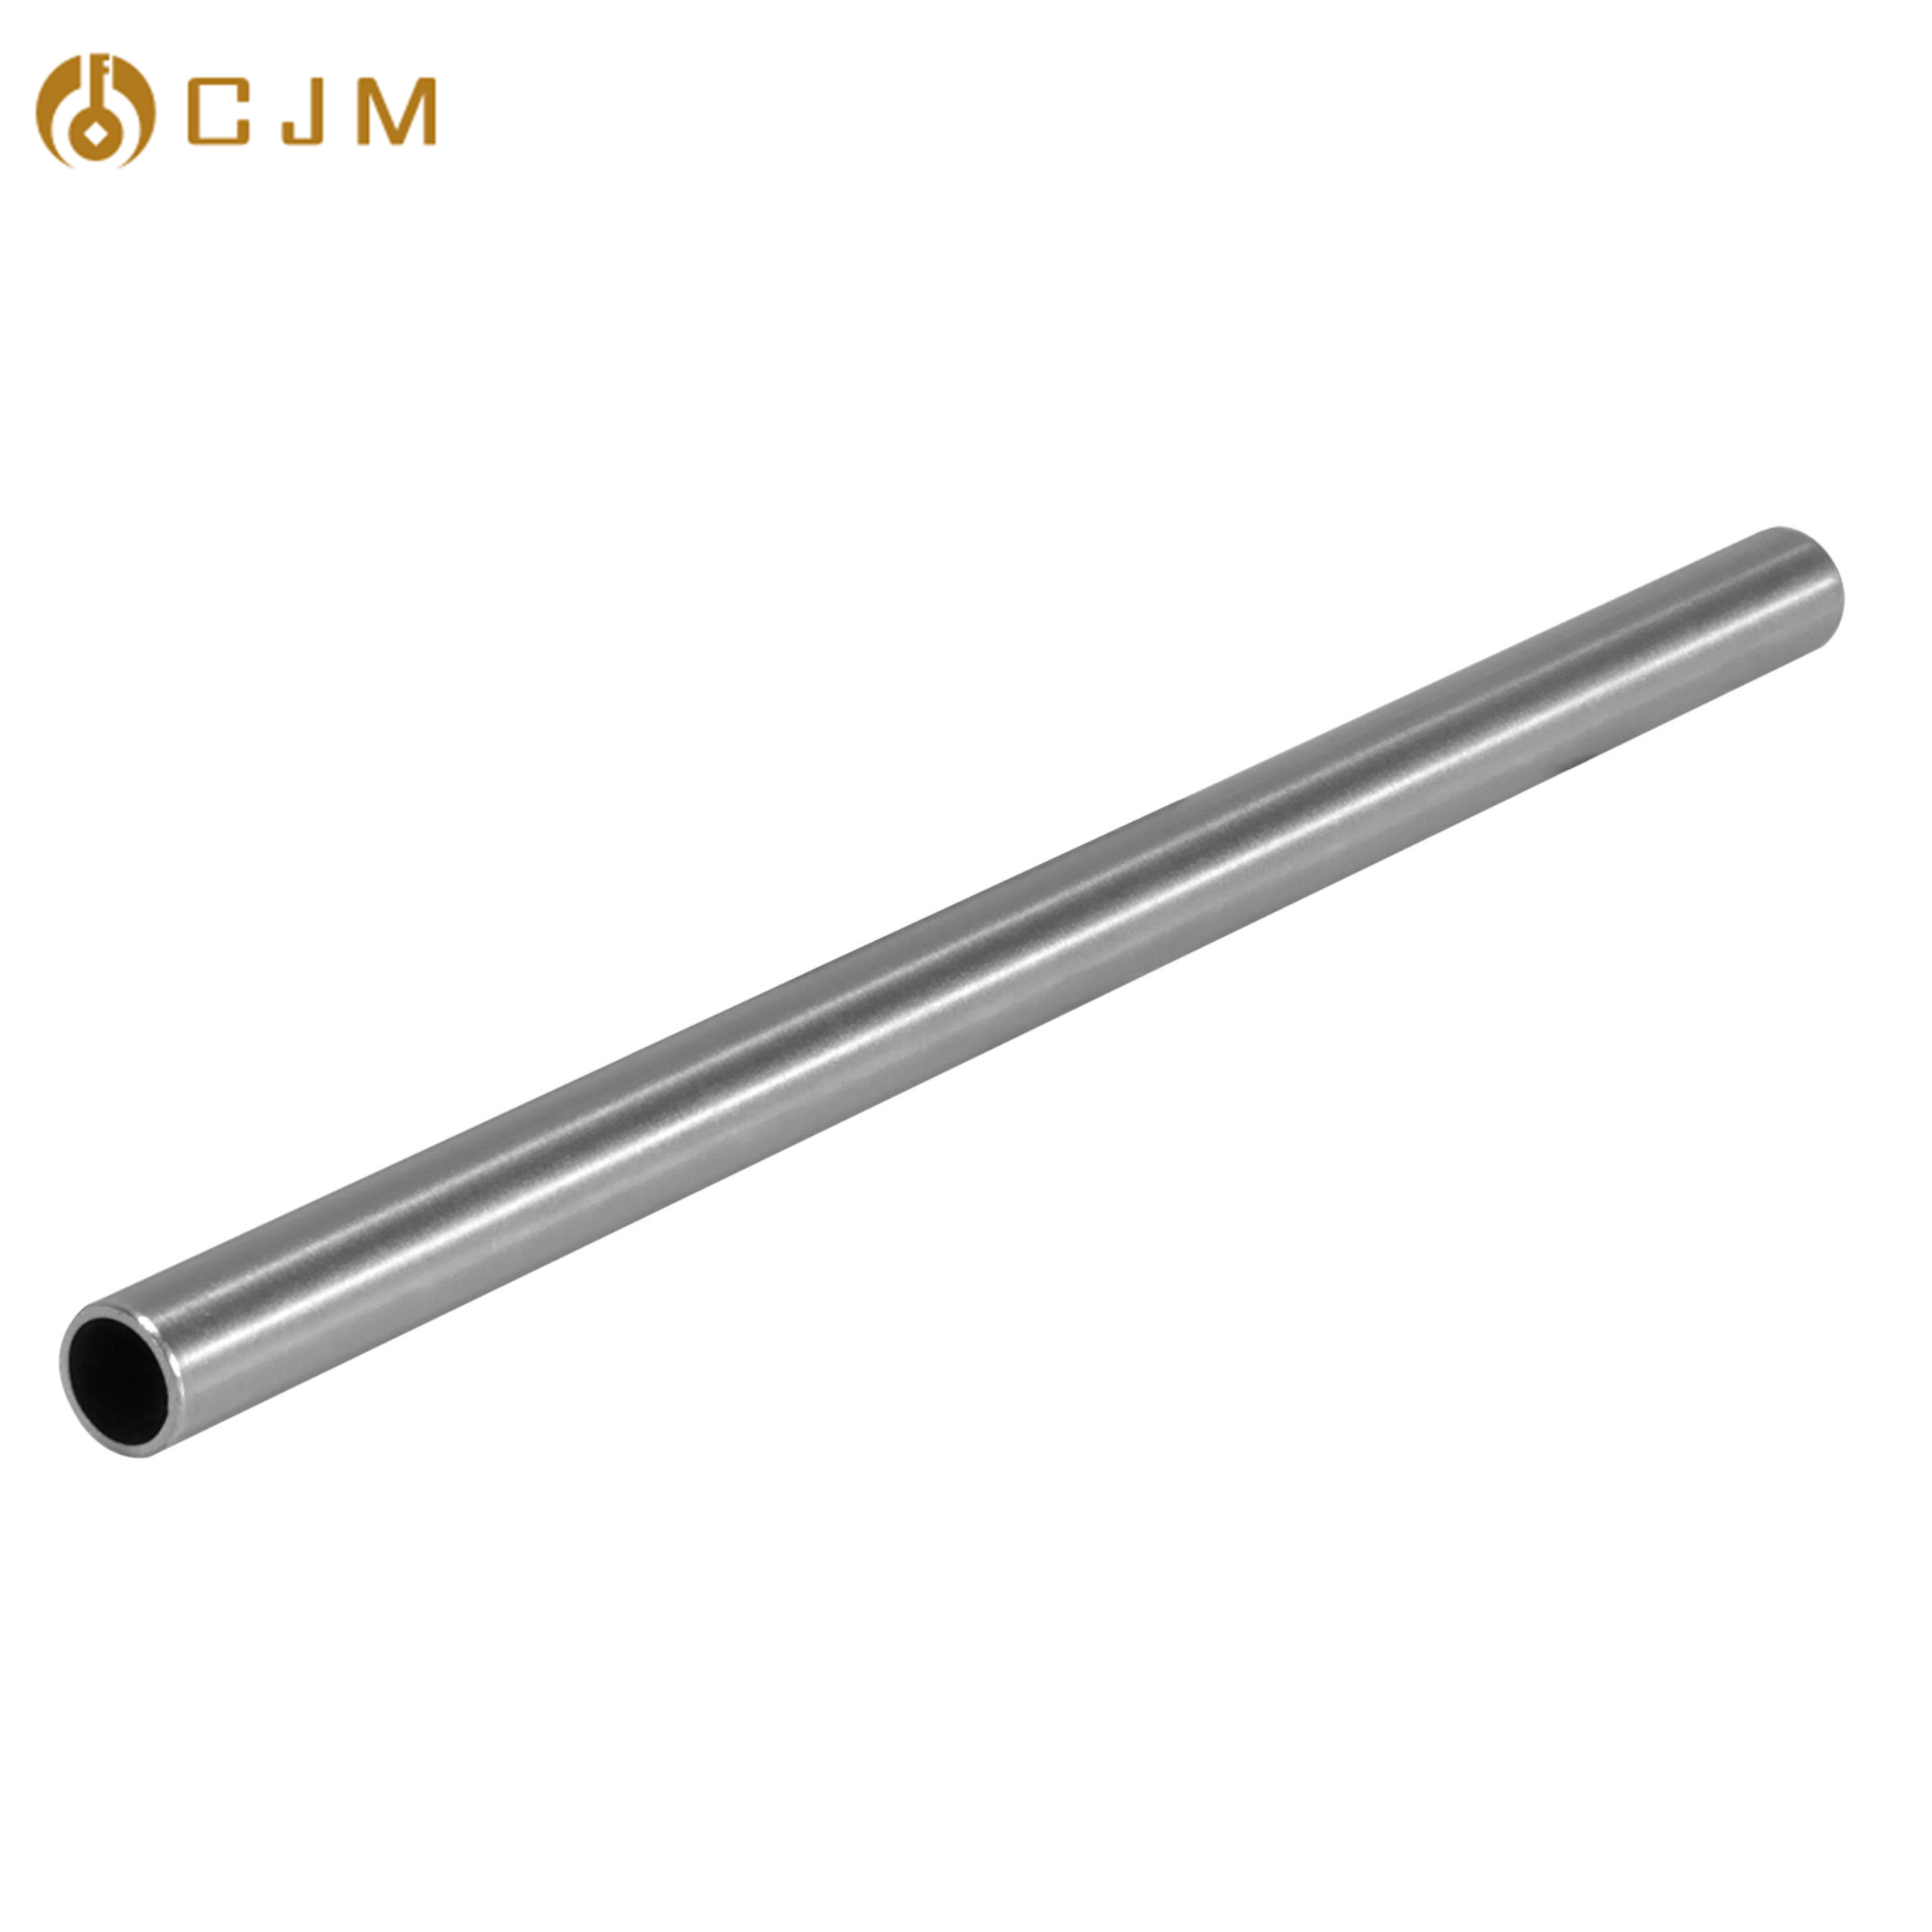 304 Stainless Steel Seamless Tube for building material